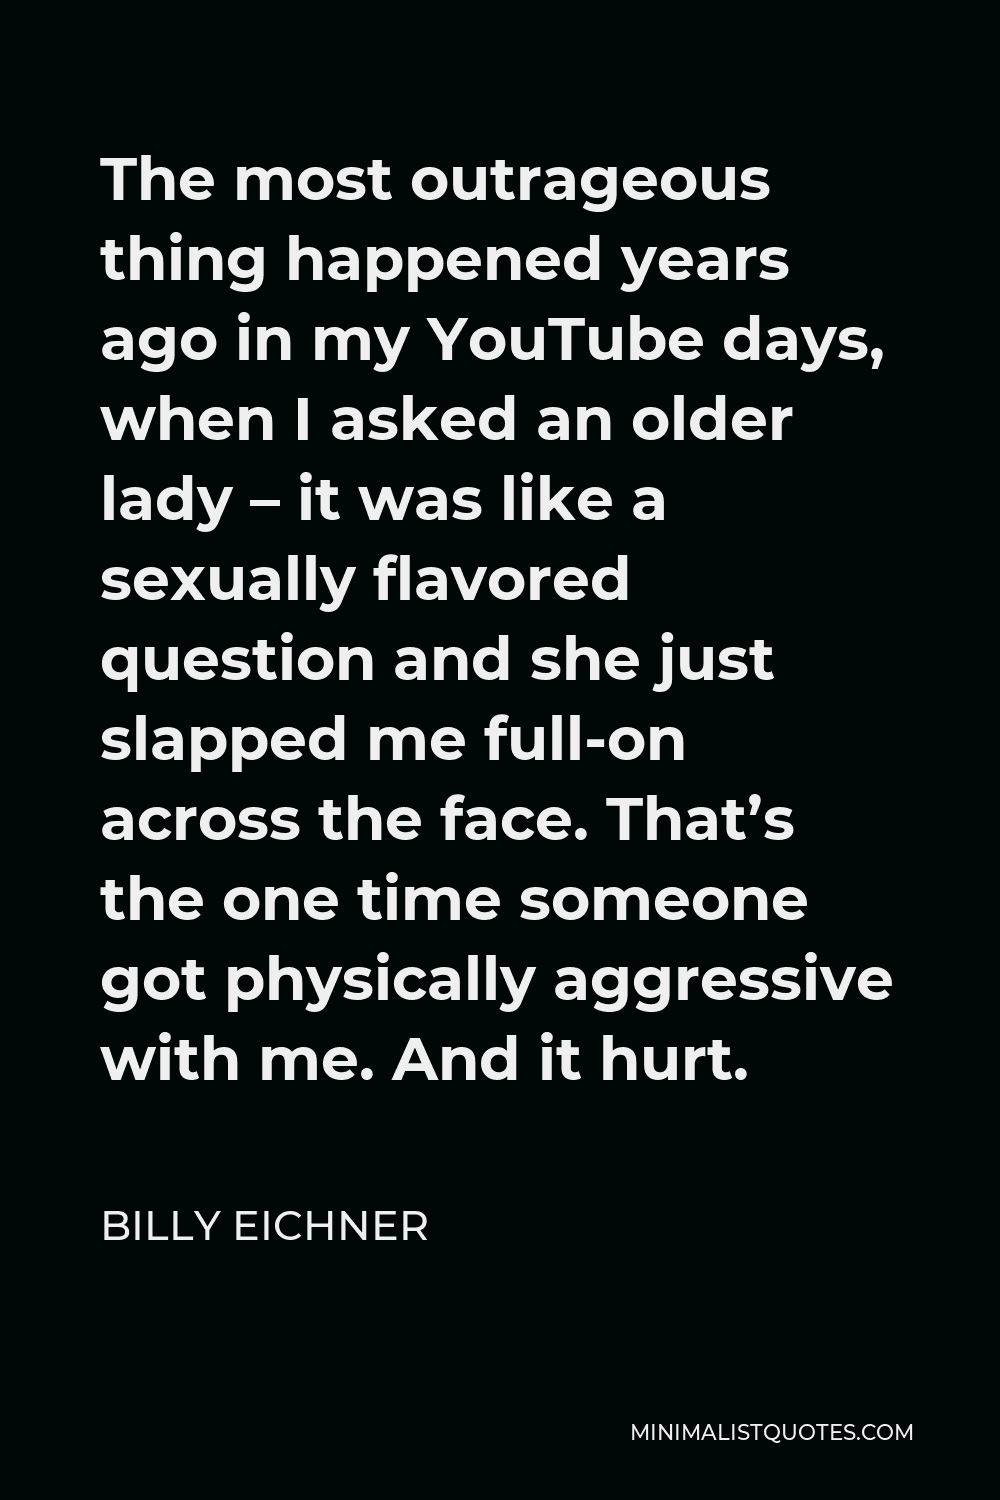 Billy Eichner Quote - The most outrageous thing happened years ago in my YouTube days, when I asked an older lady – it was like a sexually flavored question and she just slapped me full-on across the face. That’s the one time someone got physically aggressive with me. And it hurt.